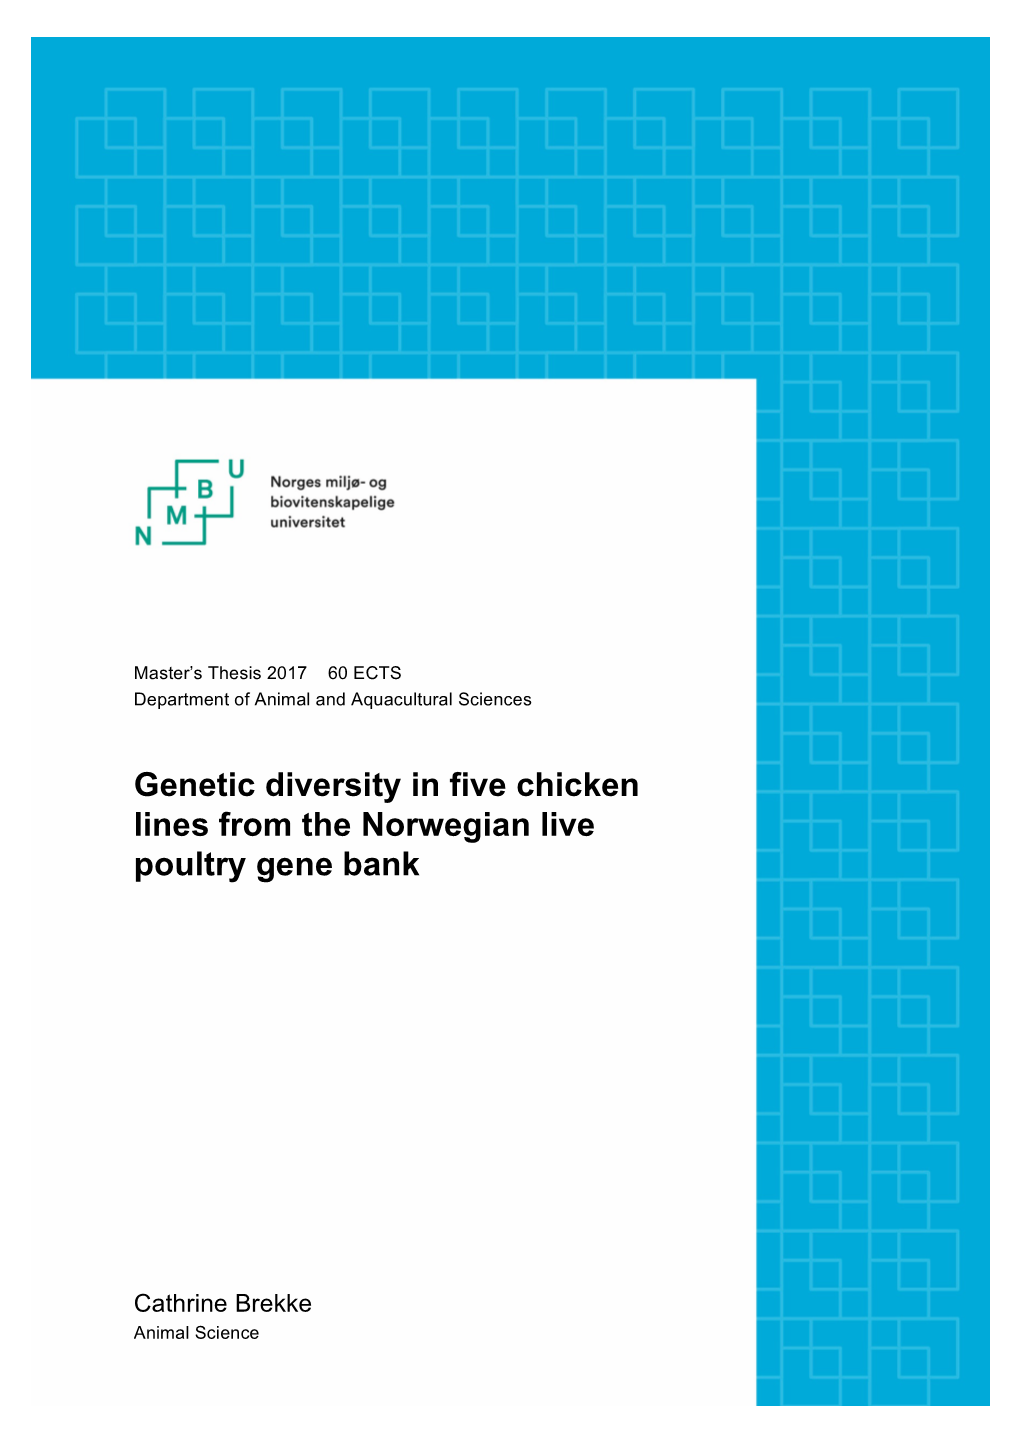 Genetic Diversity in Five Chicken Lines from the Norwegian Live Poultry Gene Bank!